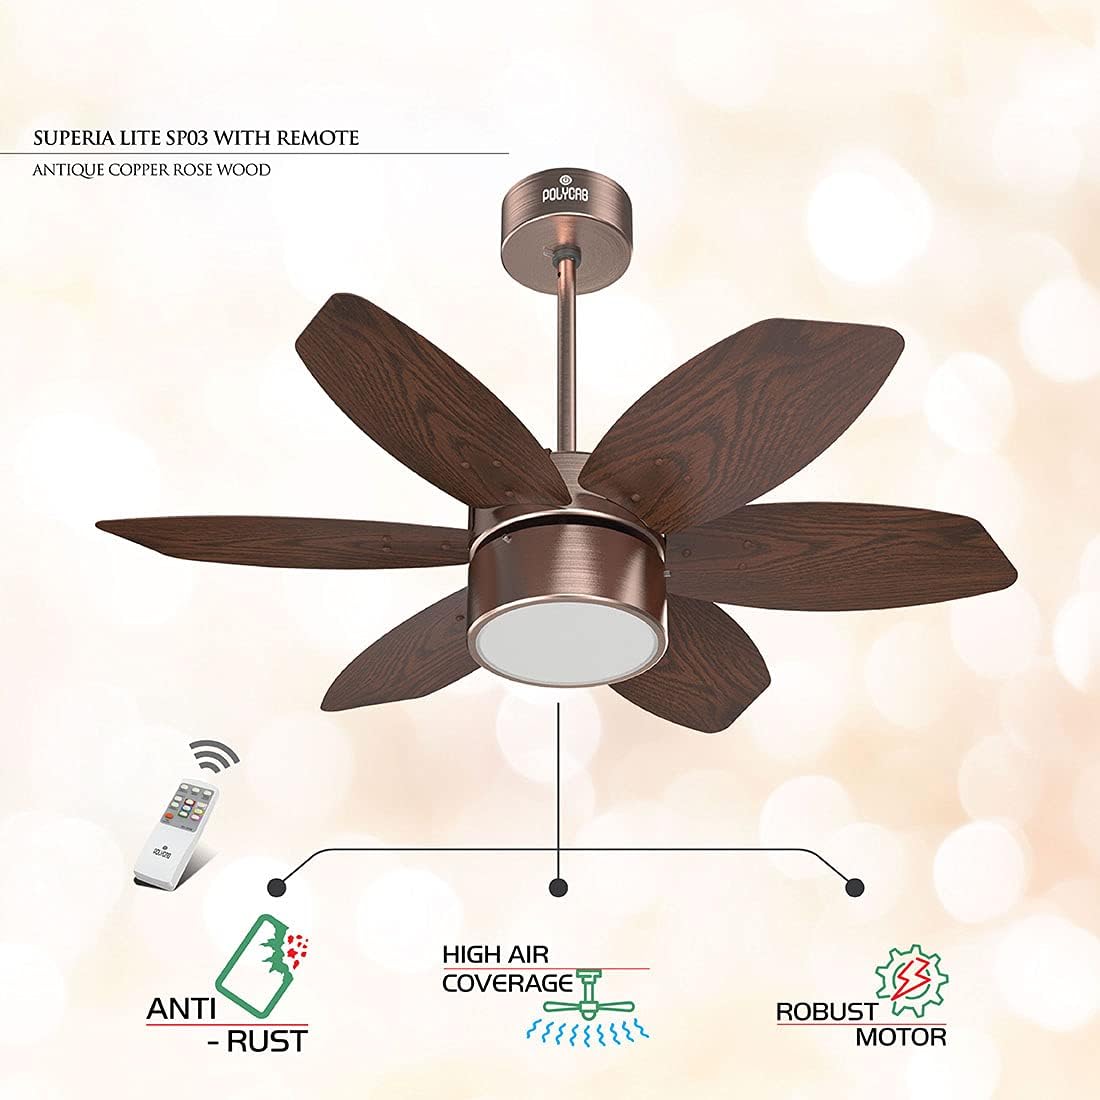 Polycab-Superia-SP03-Super-Premium-800-mm-Underlight-Designer-Ceiling-Fan-With-Remote-Built-in-6-Colour-LED-Light-and-2-years-warranty-Antique-Copper-Rosewood